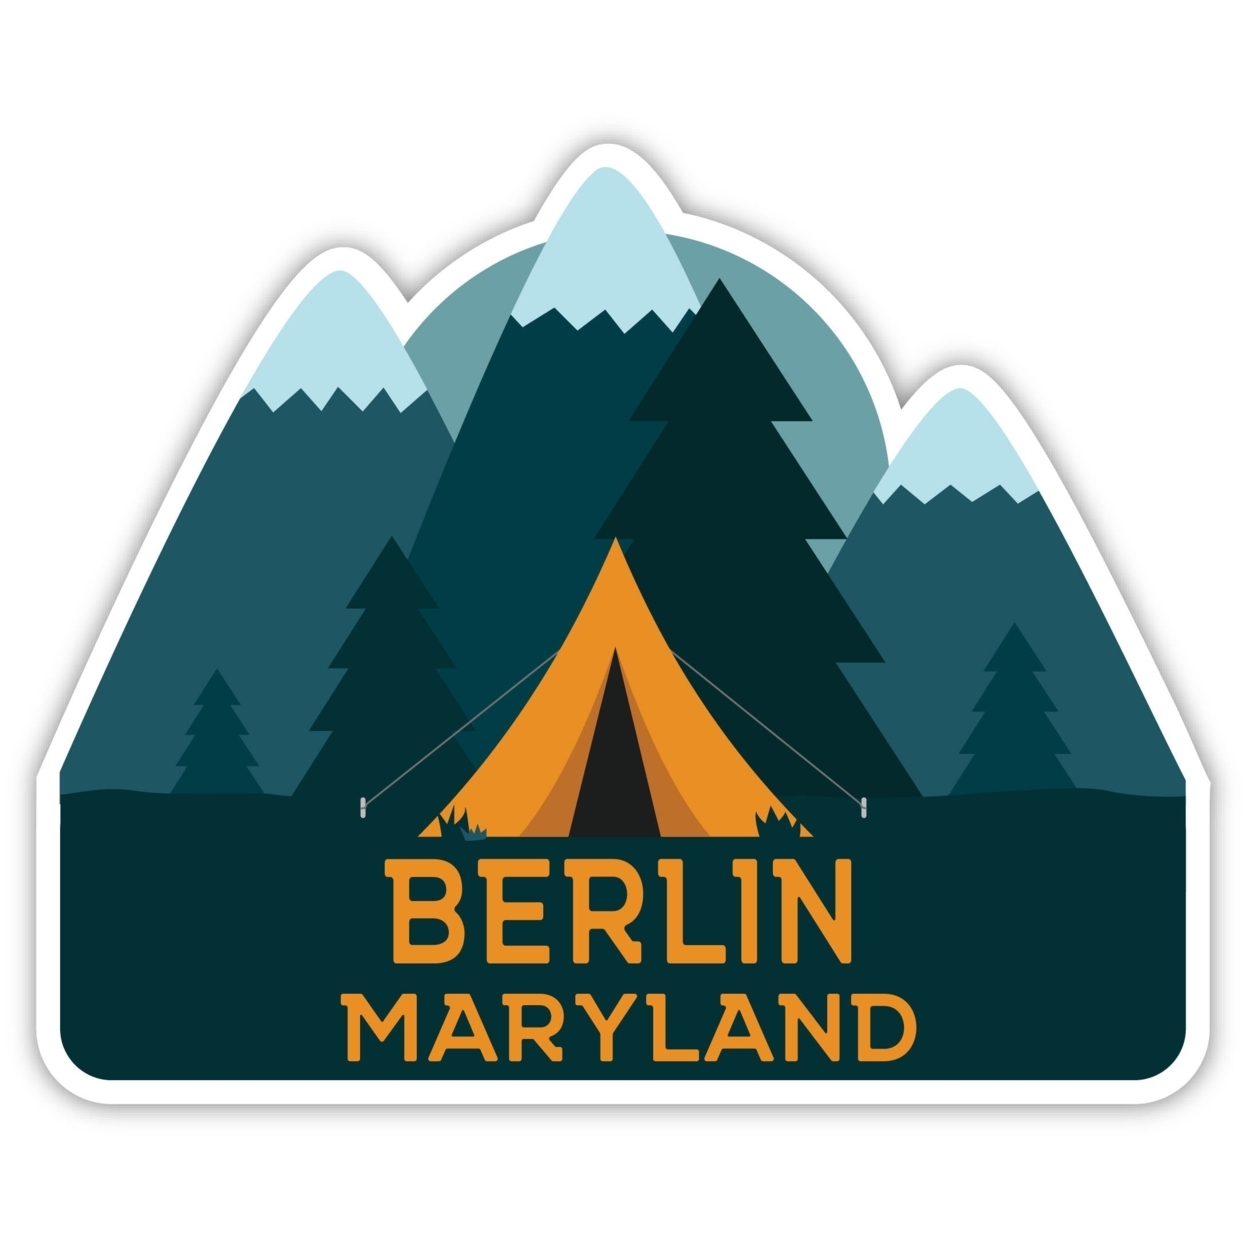 Berlin Maryland Souvenir Decorative Stickers (Choose Theme And Size) - 4-Pack, 8-Inch, Tent